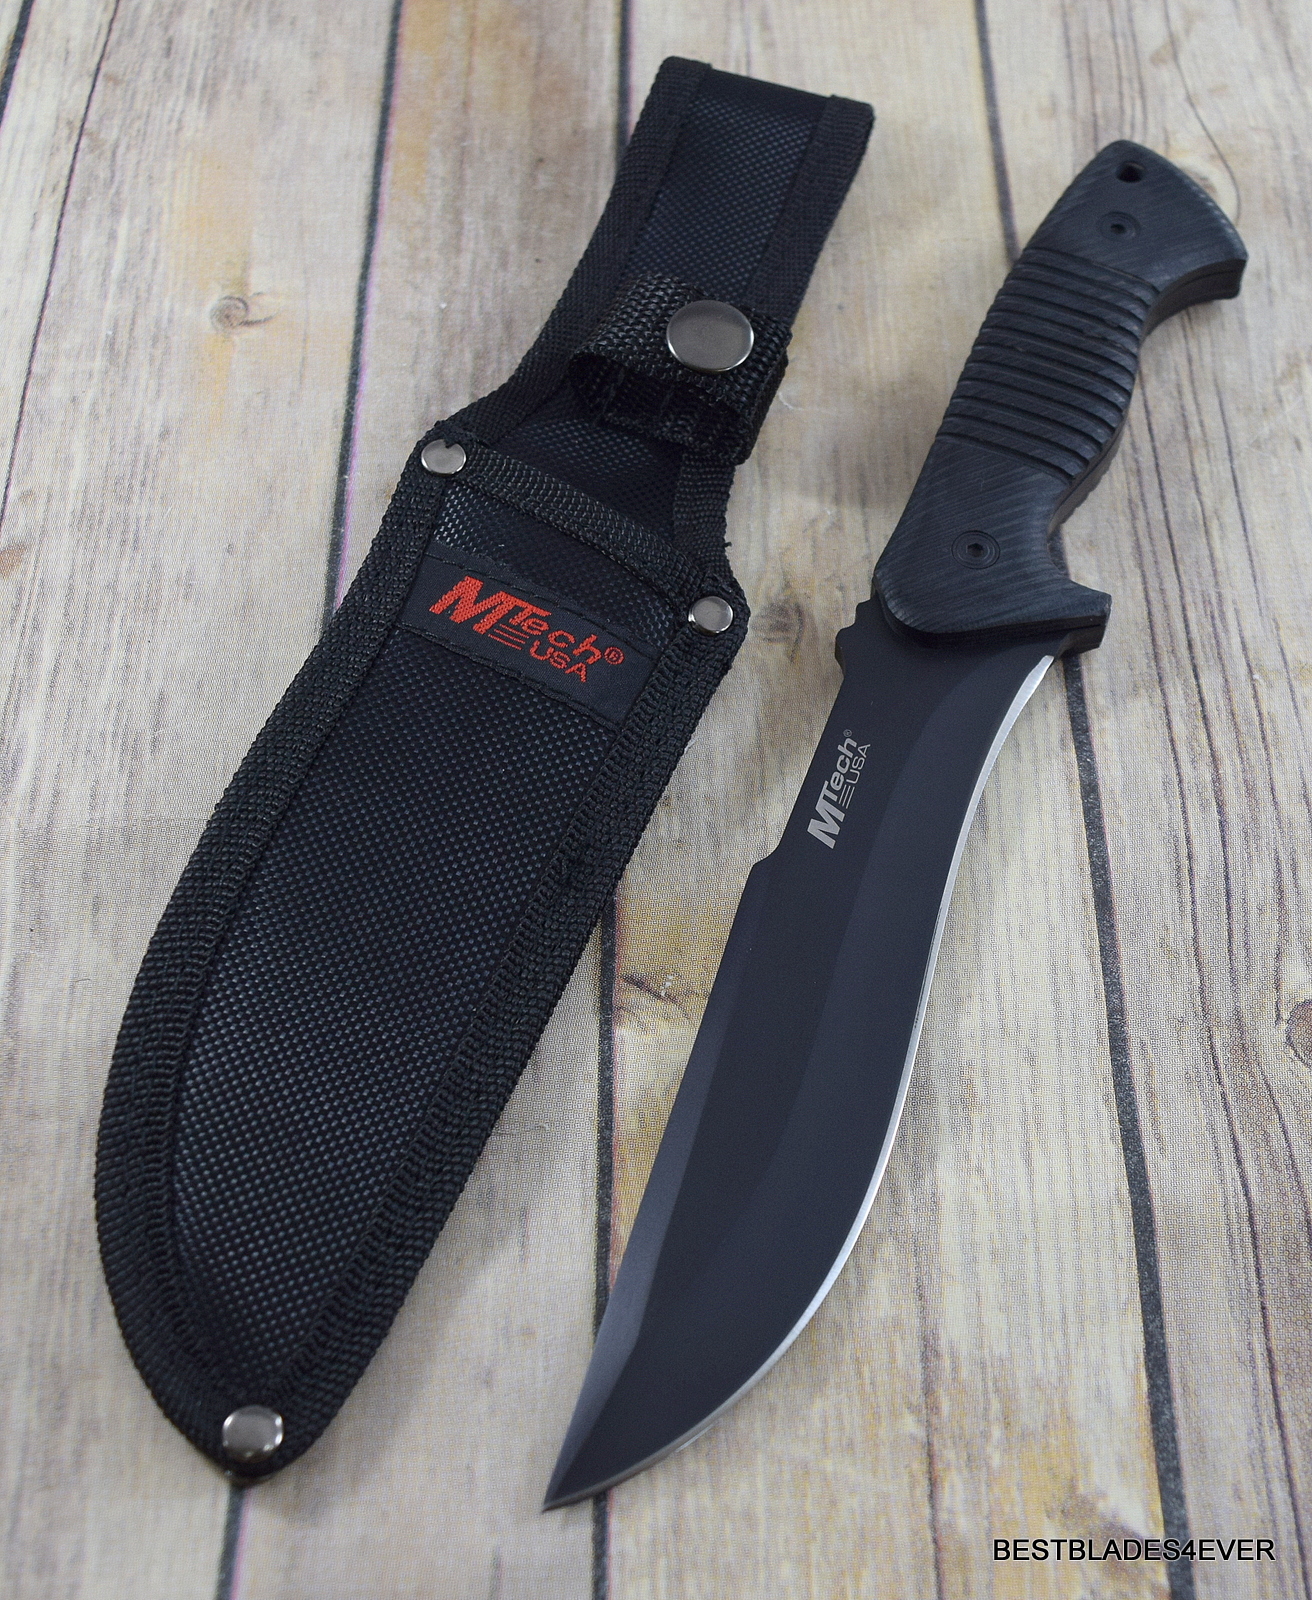 11" MTECH FIXED BLADE BOWIE HUNTING KNIFE FULL TANG WOOD HANDLE NYLON SHEATH